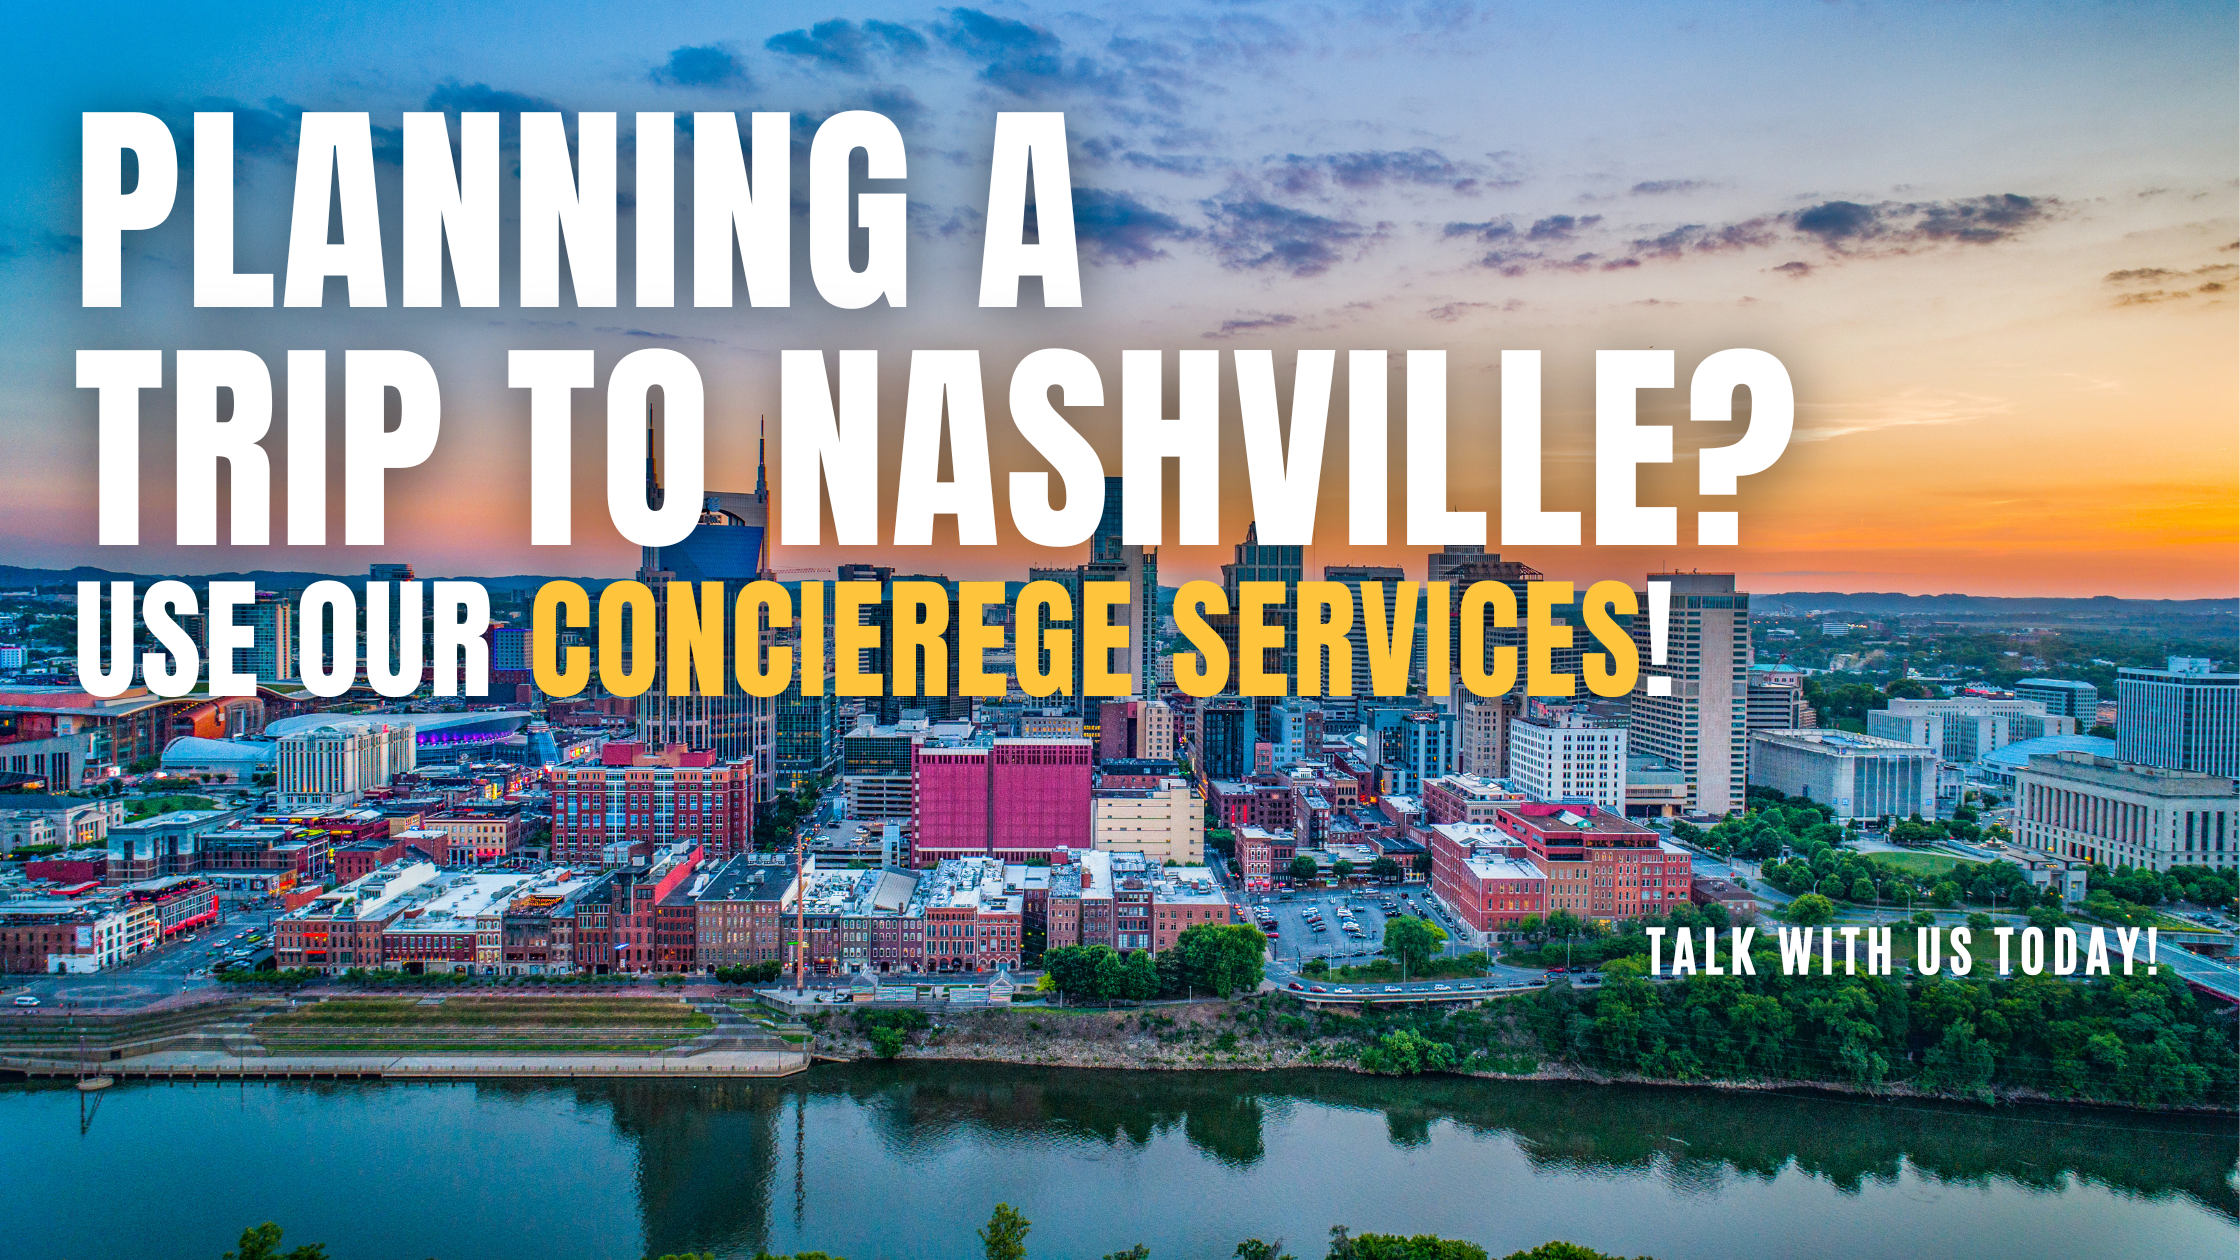 background photo of a sunset over downtown nashville with text that reads "planning a trip to nashville? Use our concierge services! talk with us today"